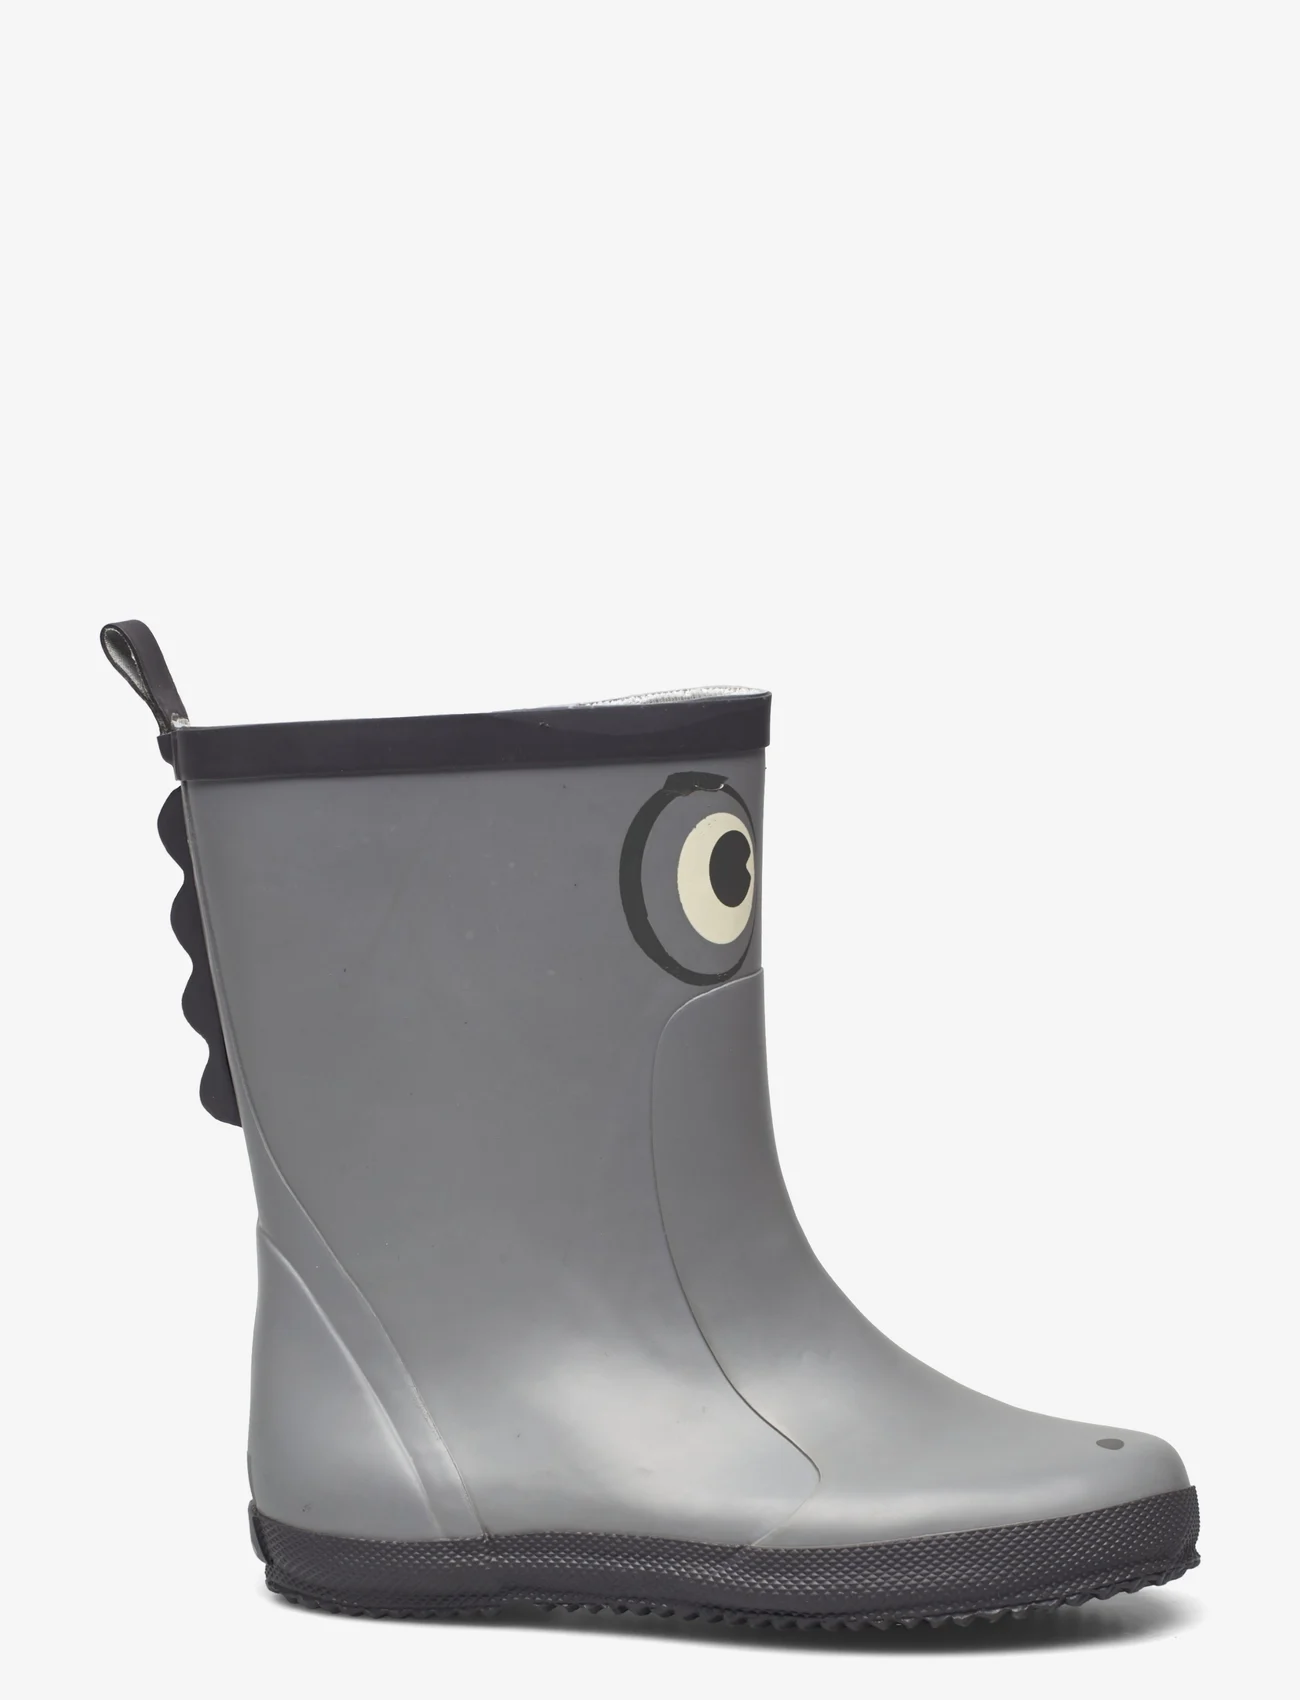 CeLaVi - Wellies - Front Print - unlined rubberboots - frost gray - 1